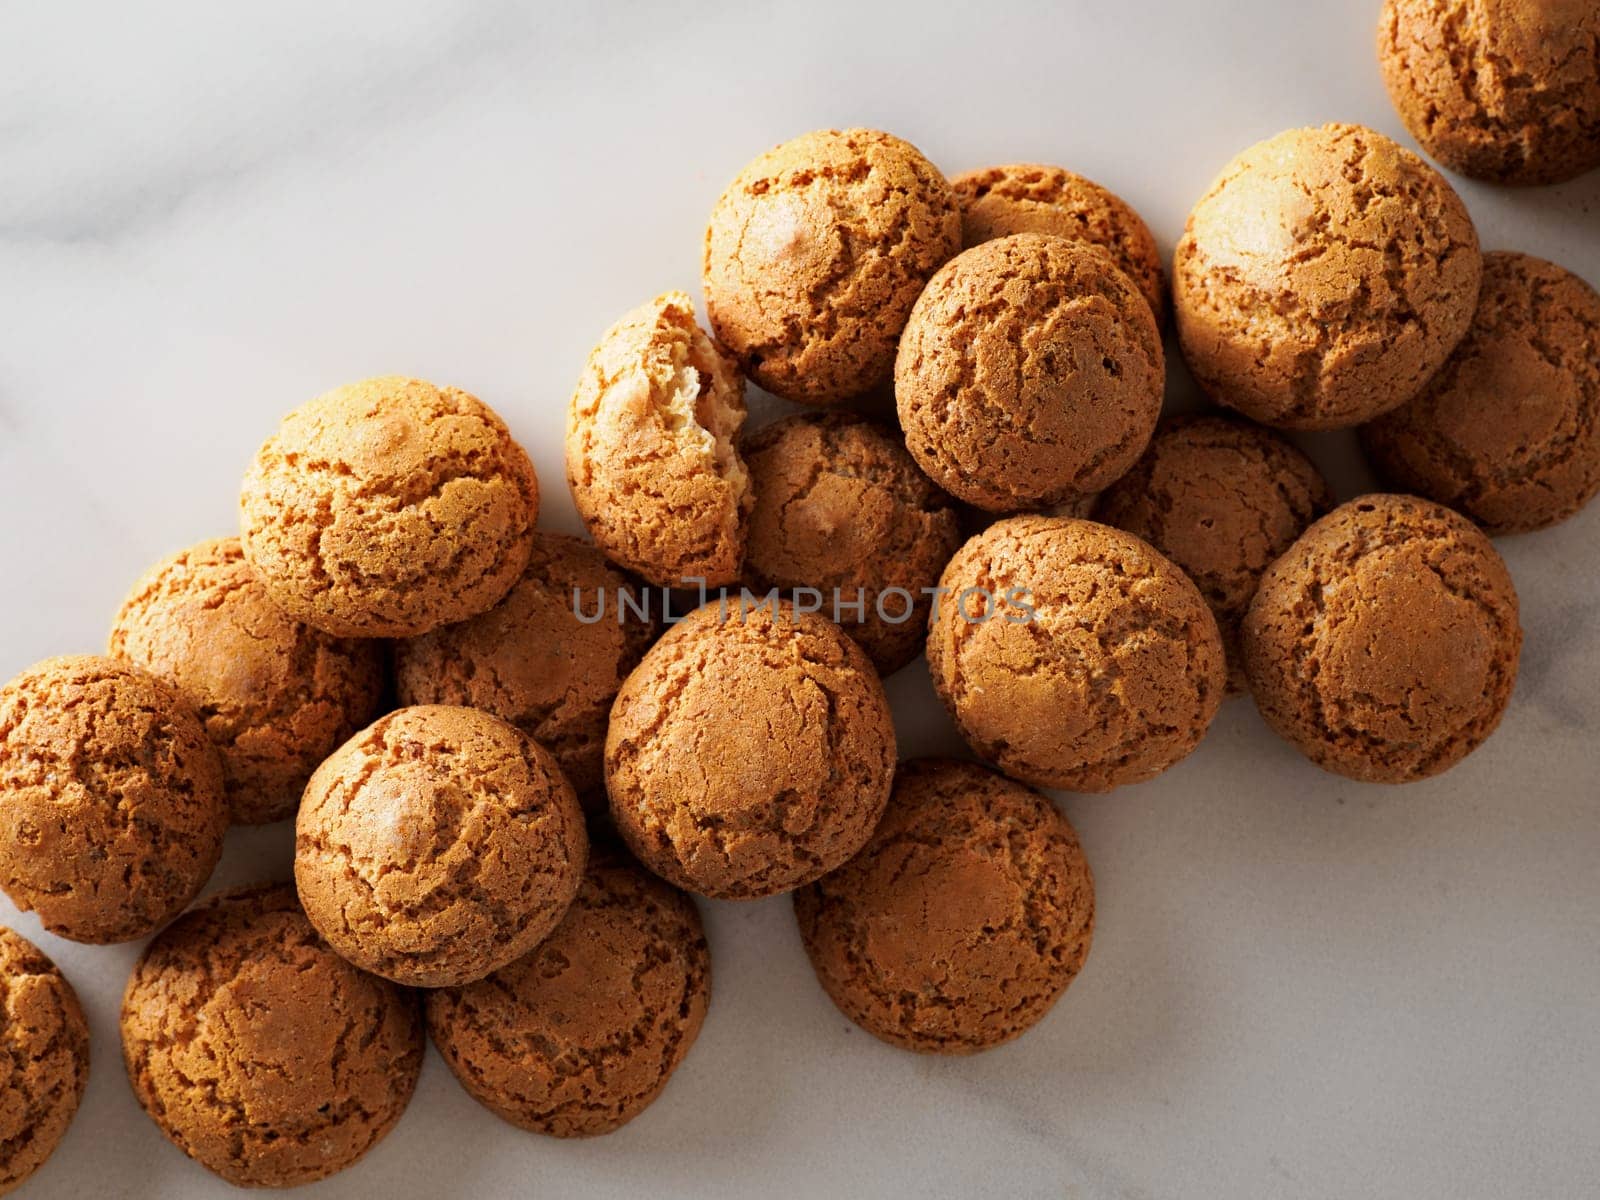 pile of cookie amaretti on white marble background - traditional Italian Sardinian pastry. Delicious amaretti biscuit cookies made from almond or apricot kernels with copy space